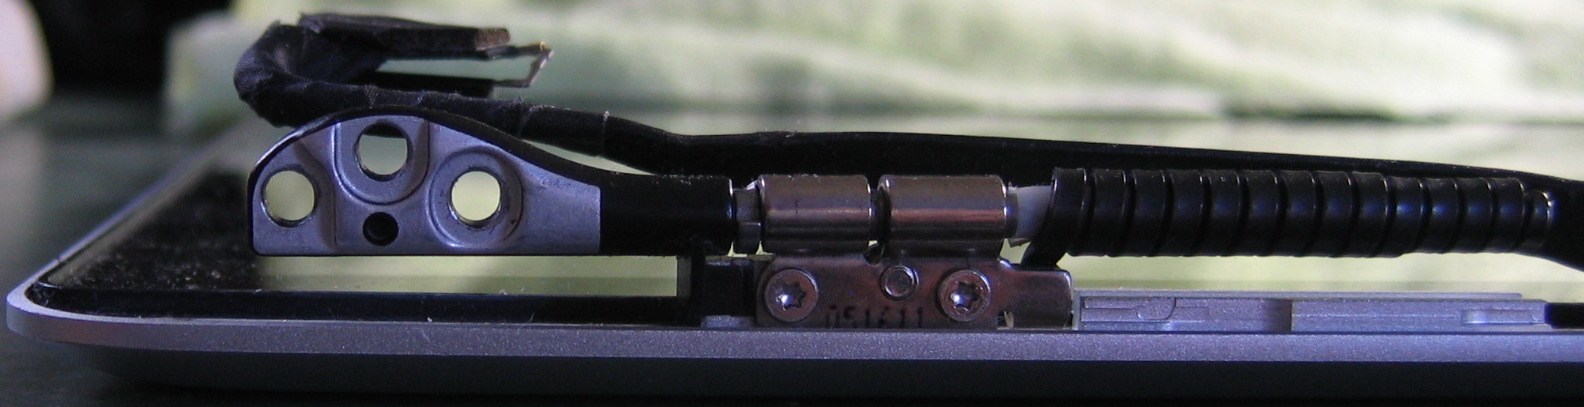 Close-up of left hinge/mounting bracket assembly, viewed from the bottom